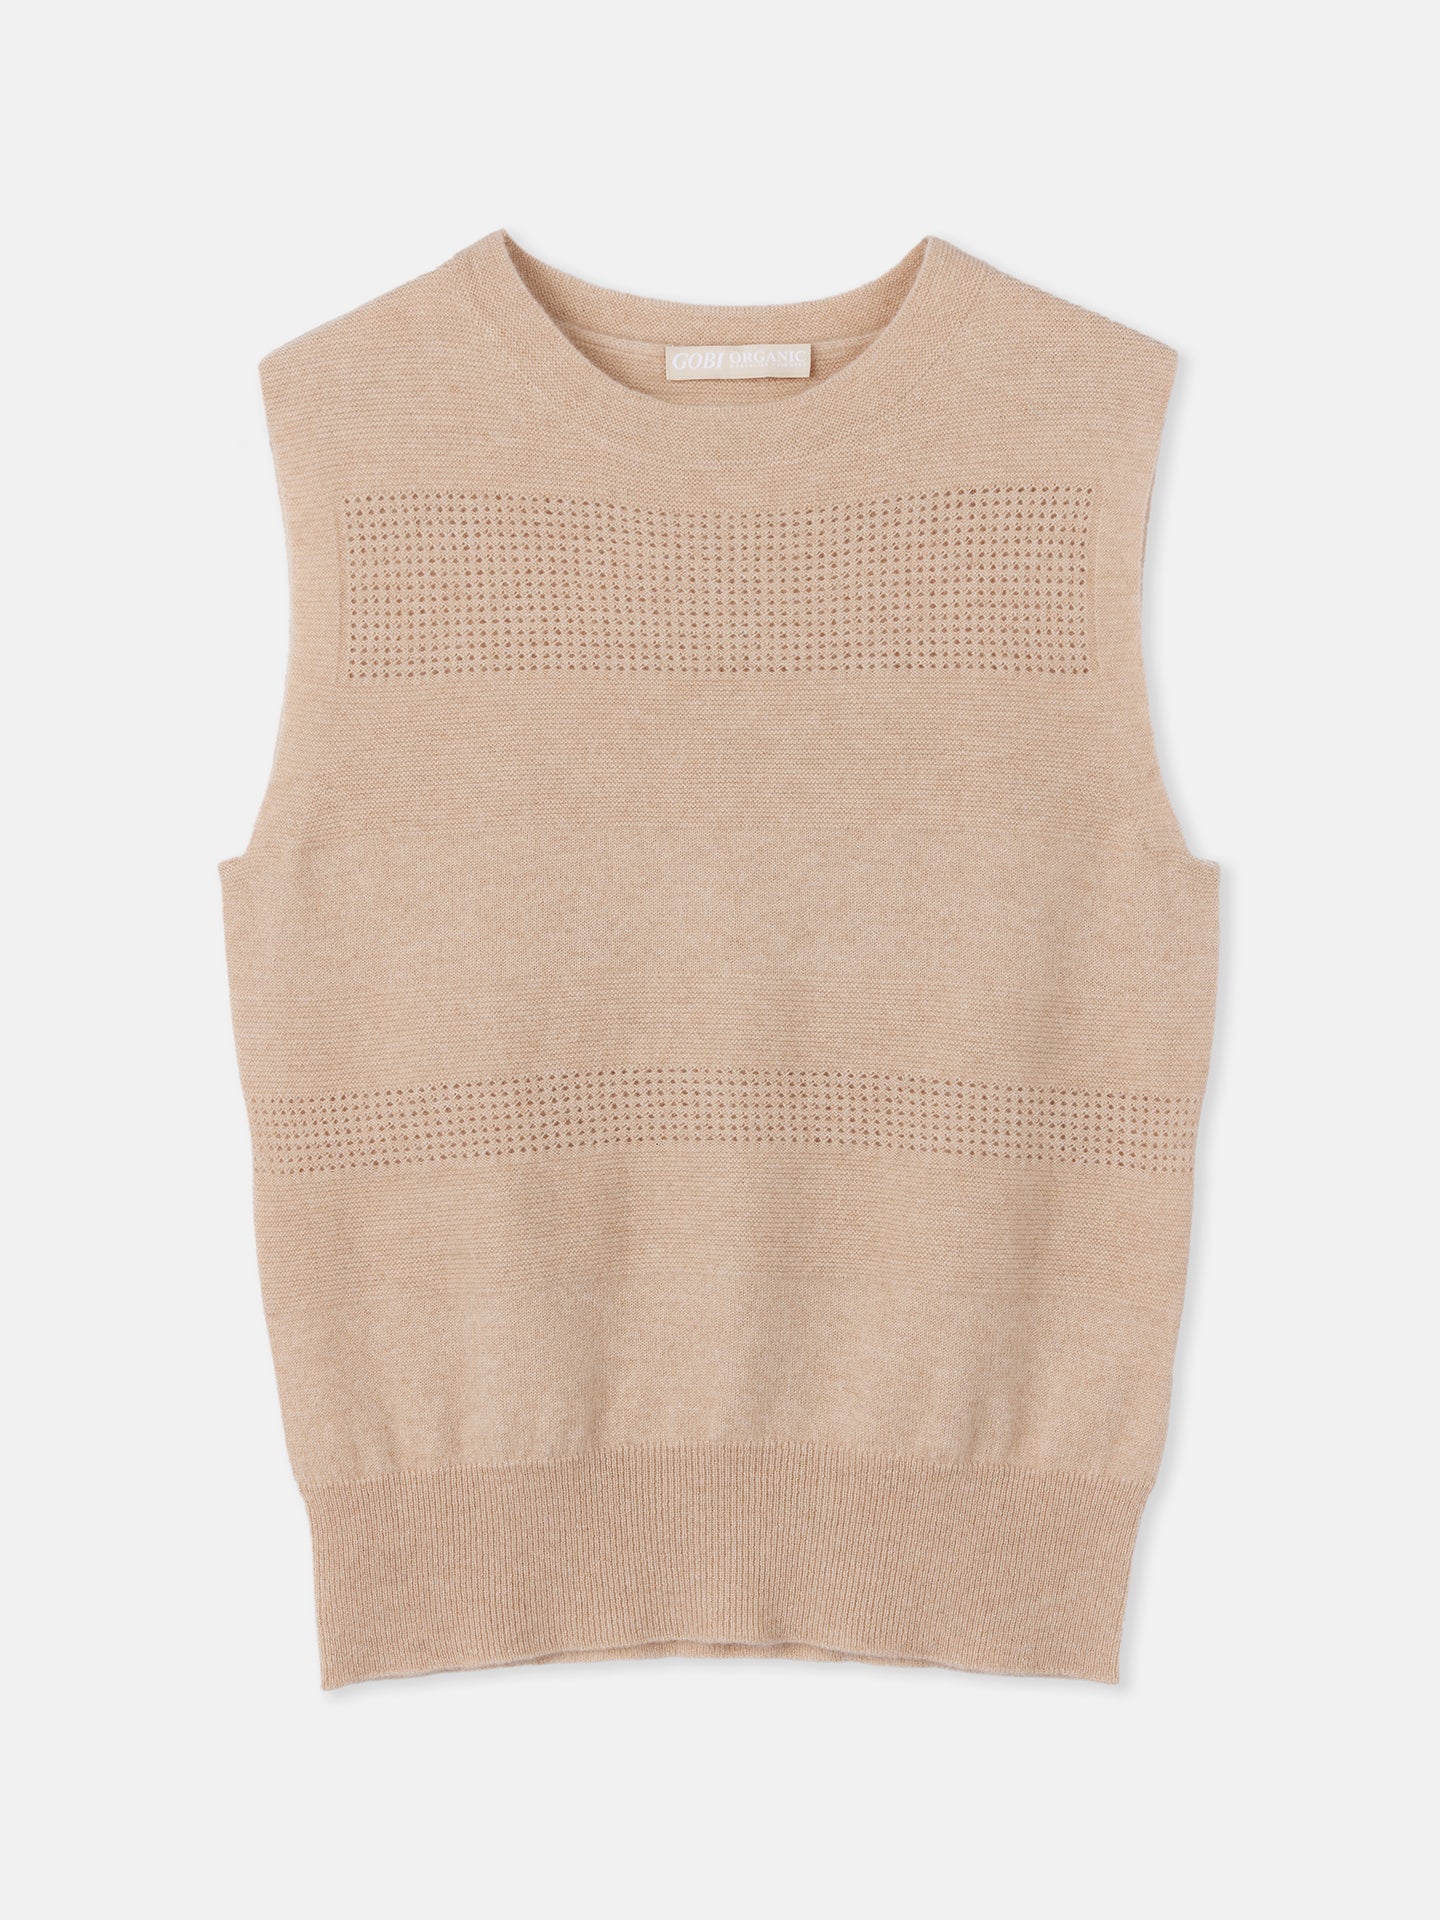 Seamless Cashmere Vest with Mixed Patterns Taupe | GOBI Cashmere